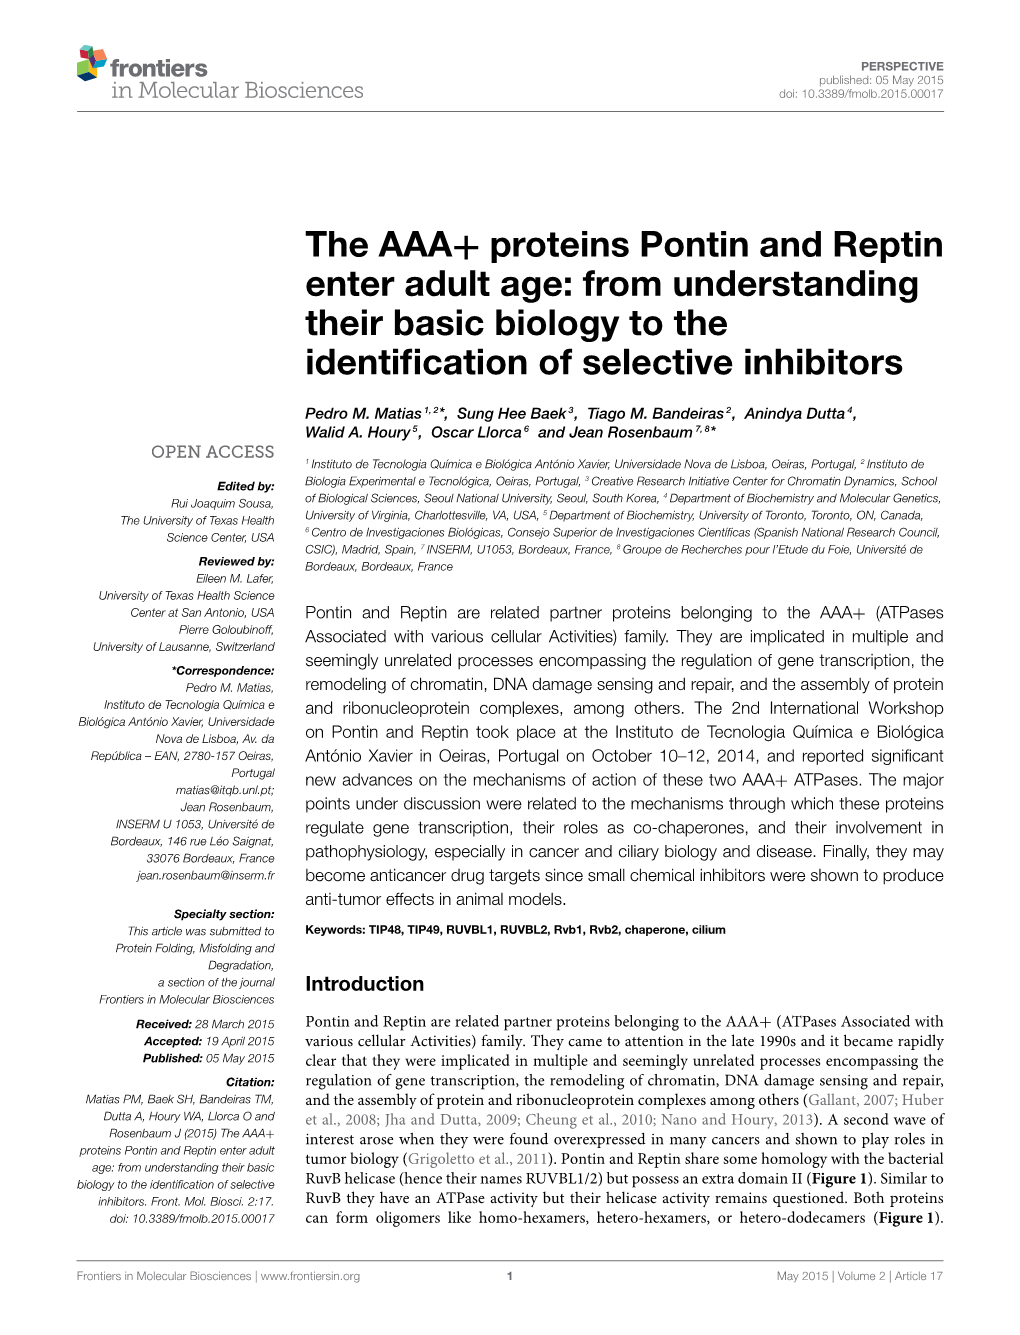 The AAA+ Proteins Pontin and Reptin Enter Adult Age: from Understanding Their Basic Biology to the Identiﬁcation of Selective Inhibitors